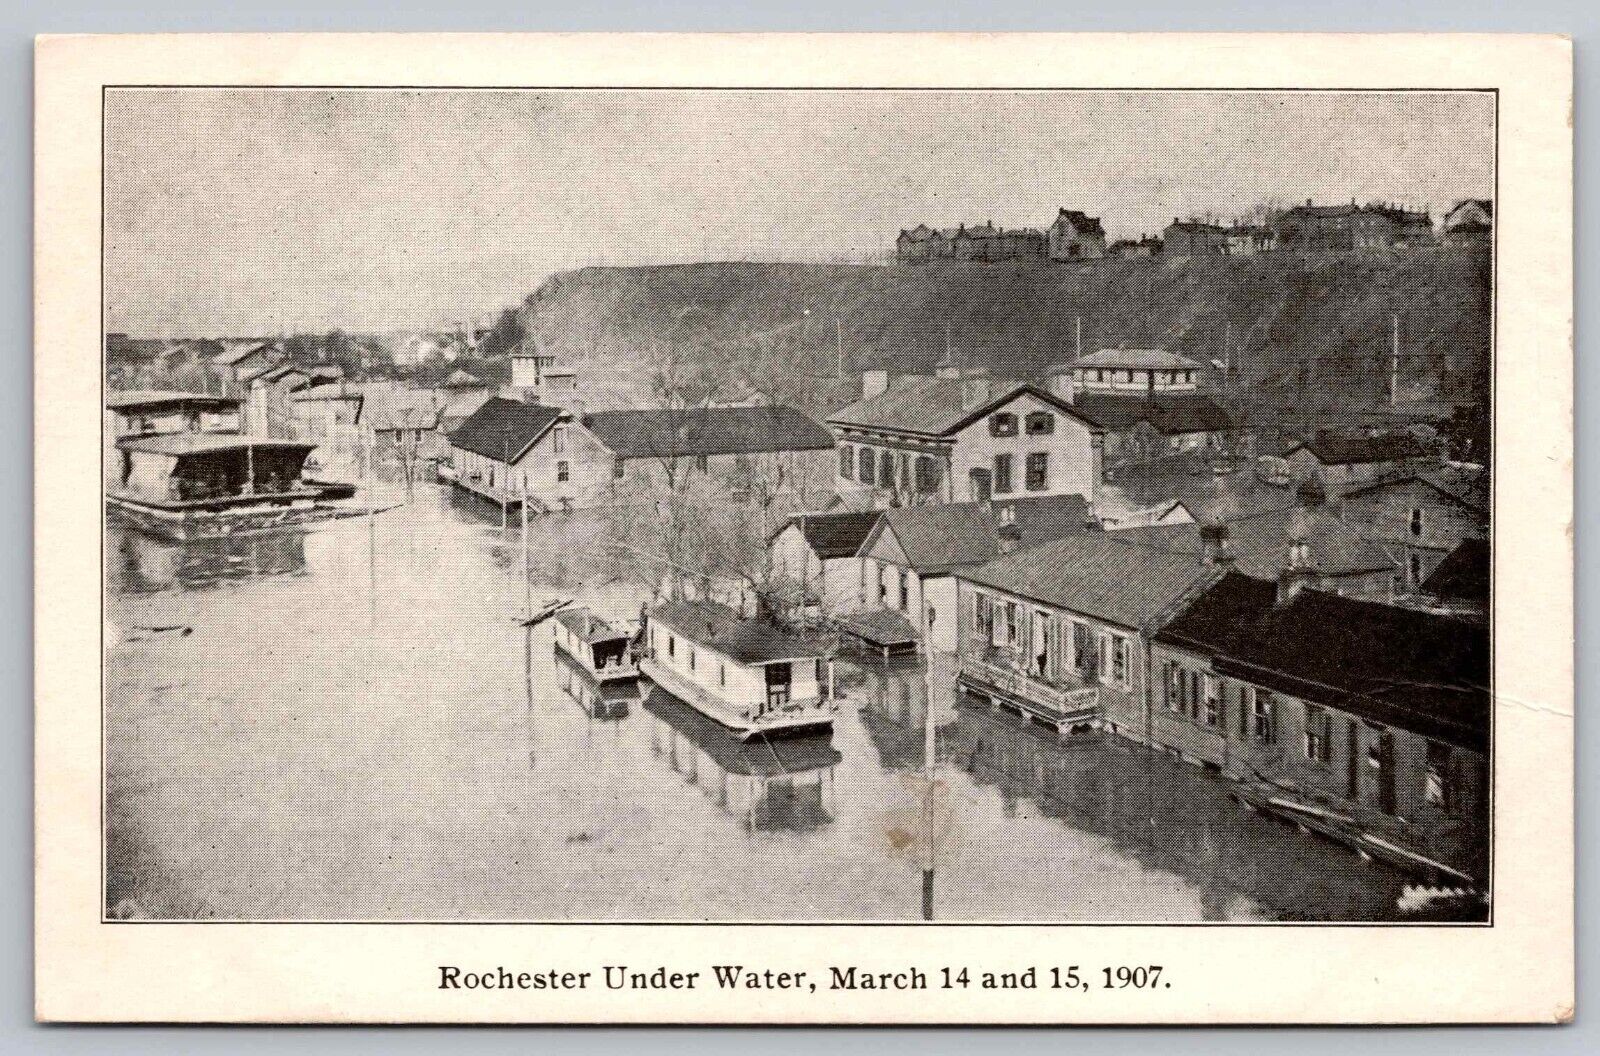 Postcard Rochester Under Water Disaster Flood Calamity March 14 15 1907